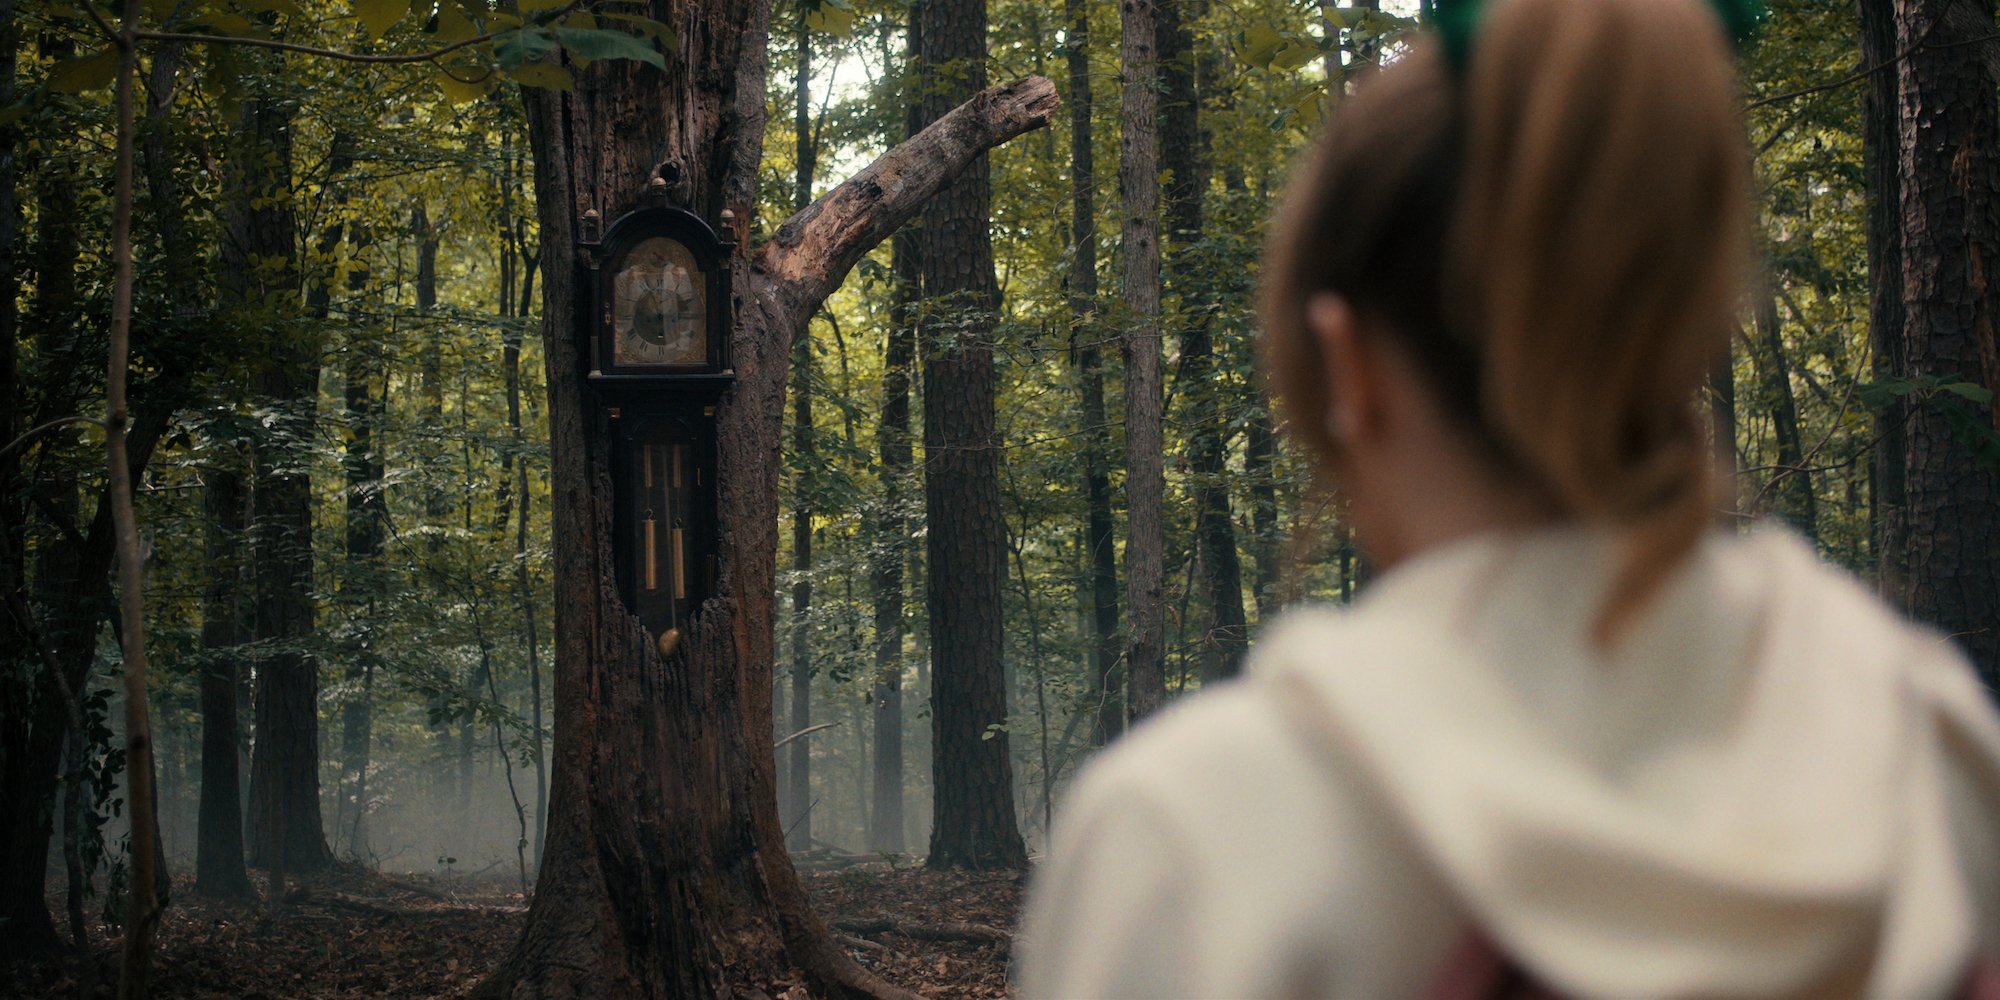 'Stranger Things 4' villain Vecna makes a clock appear hours before he kills his victims. Grace Van Dien as Chrissy Cunningham sees the clock in the woods in this production still